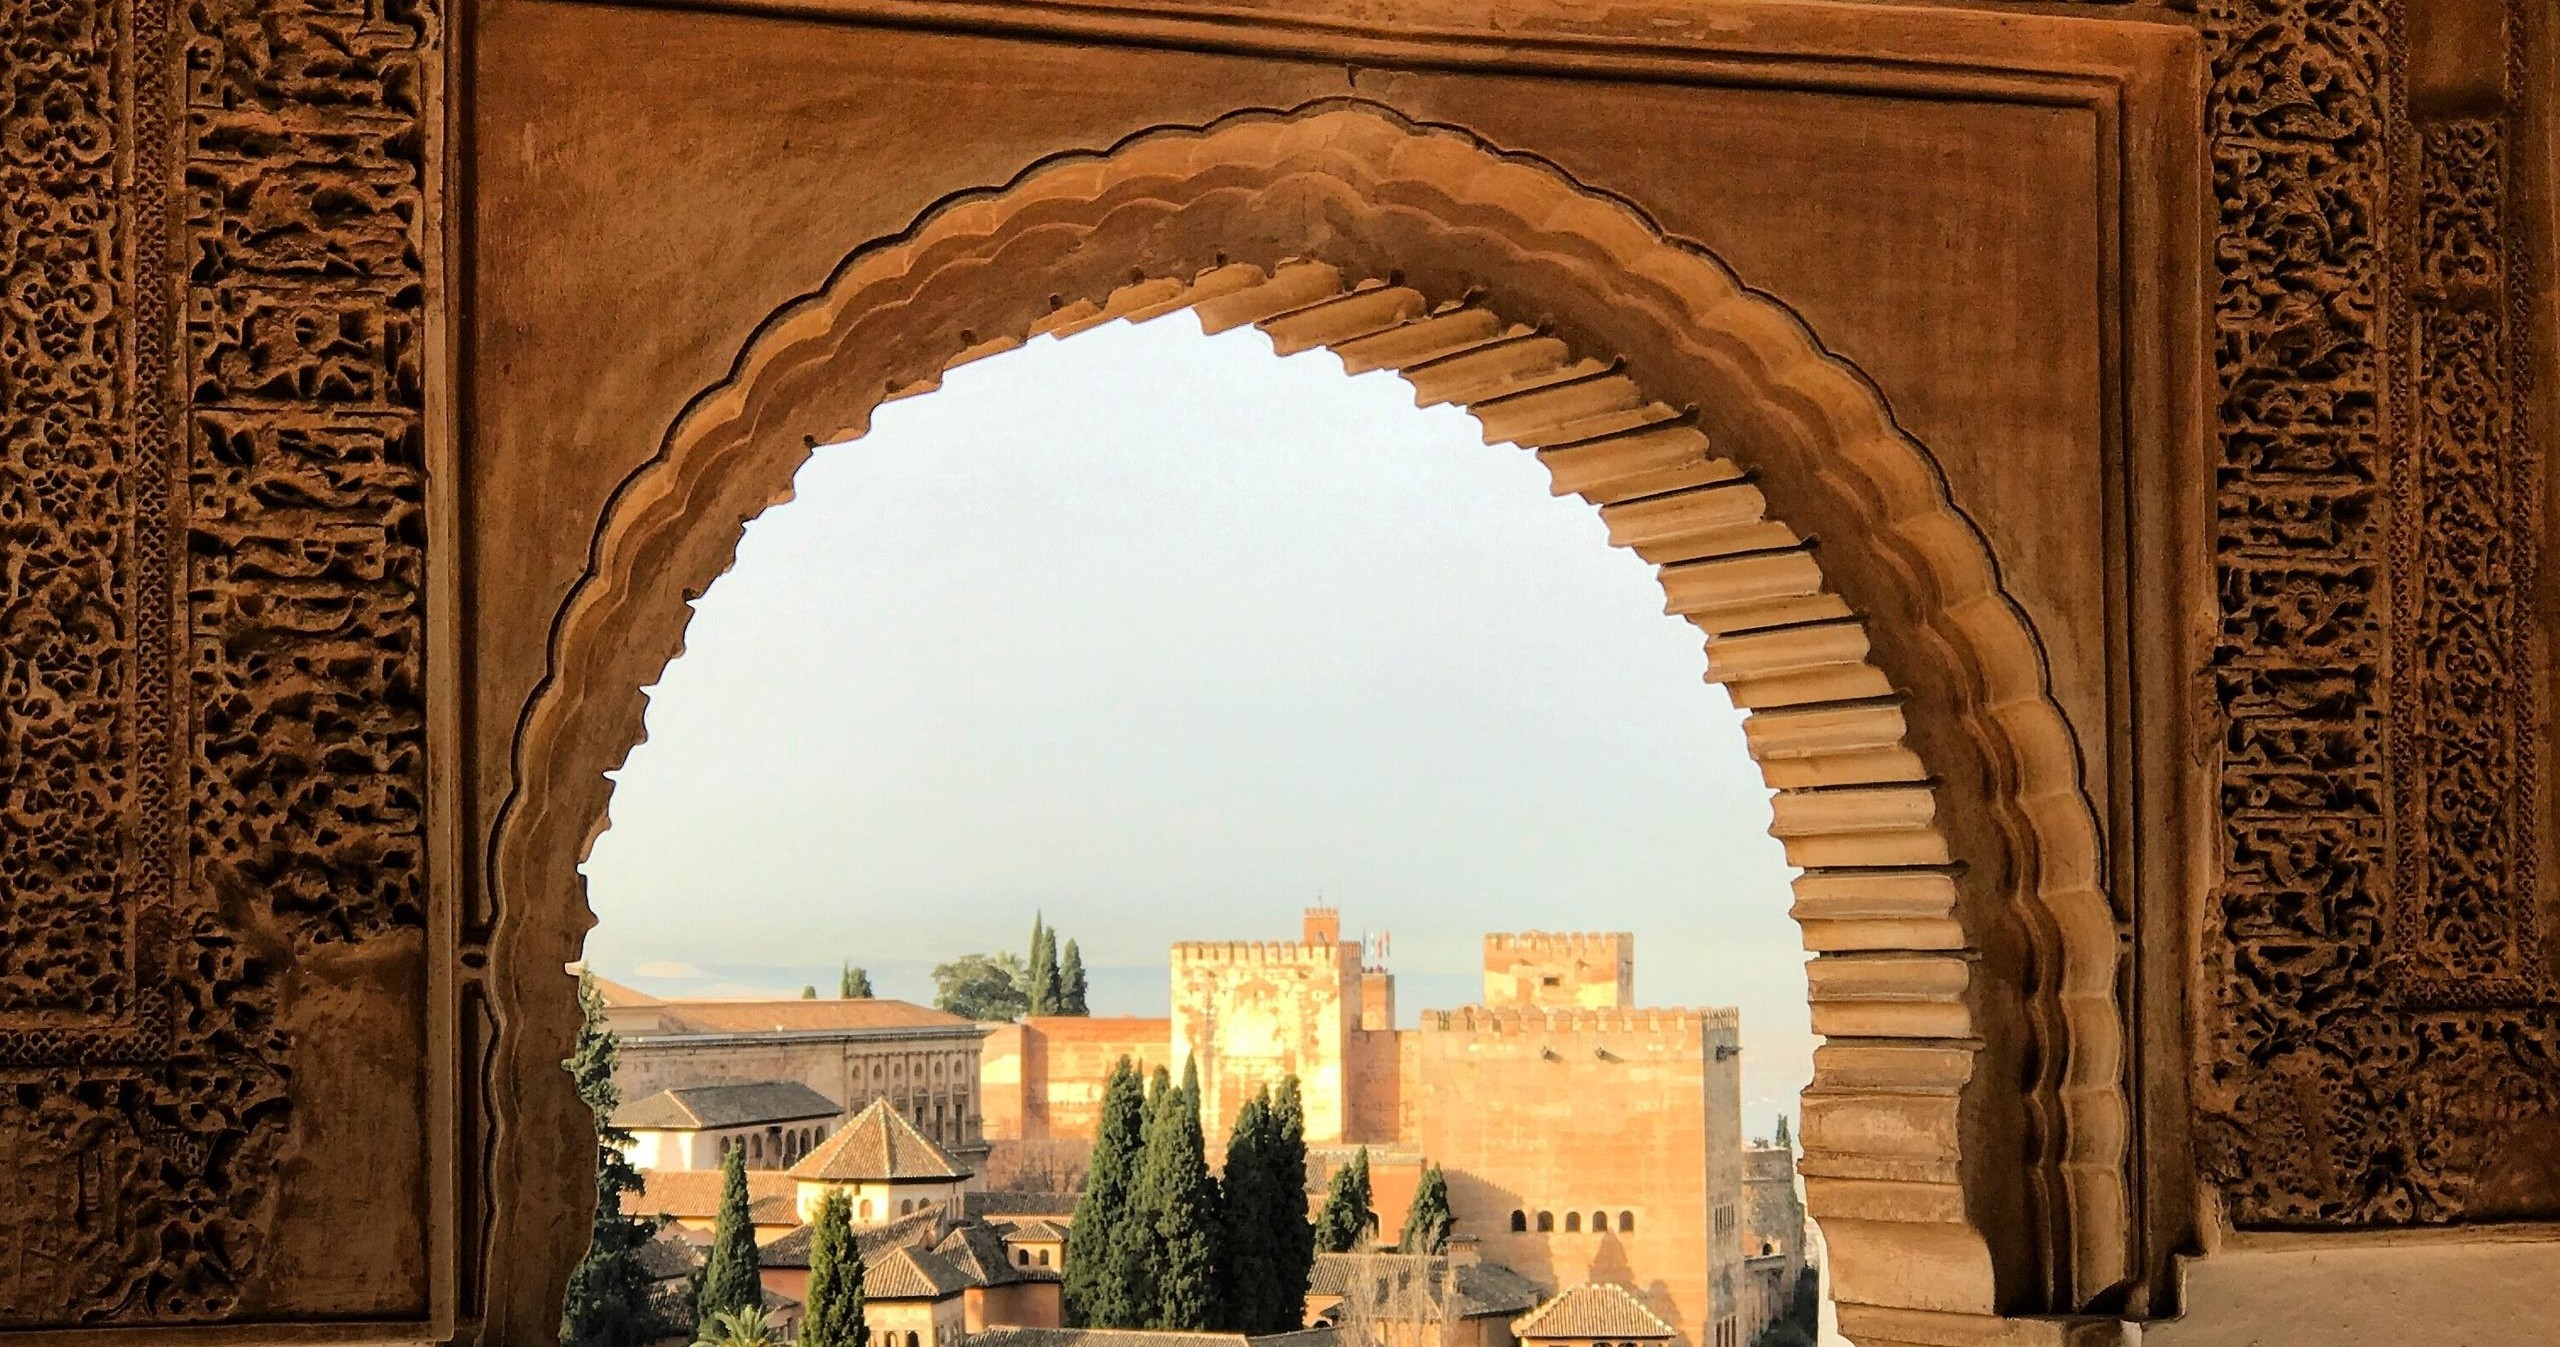 Premium Guided Tour to the Alhambra in Full with Generalife Gardens and Nasrid Palaces in Semi-Private - Accommodations in Granada